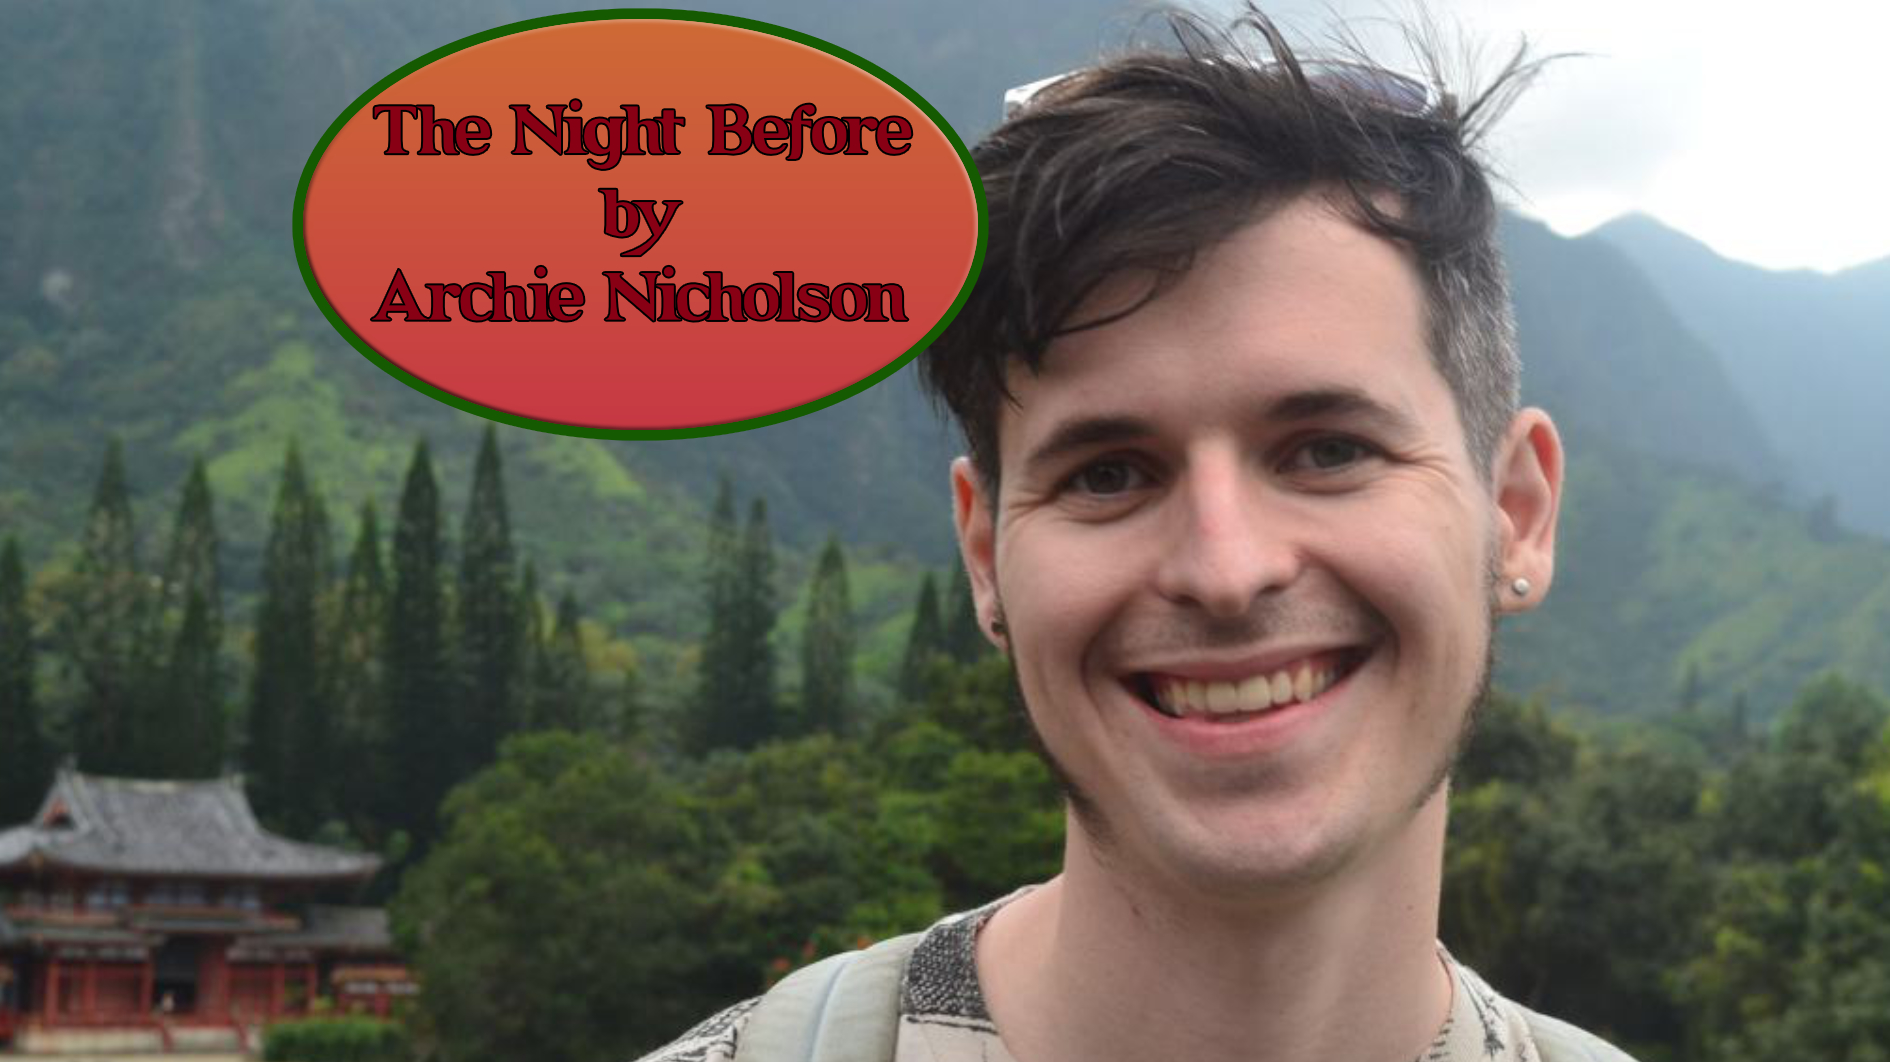 The Night Before, Archie Nicholson, short story, story, fiction, historical fiction, amreading, amwriting, read, ebook, writing, new release, must read, free book, collective folk fiction